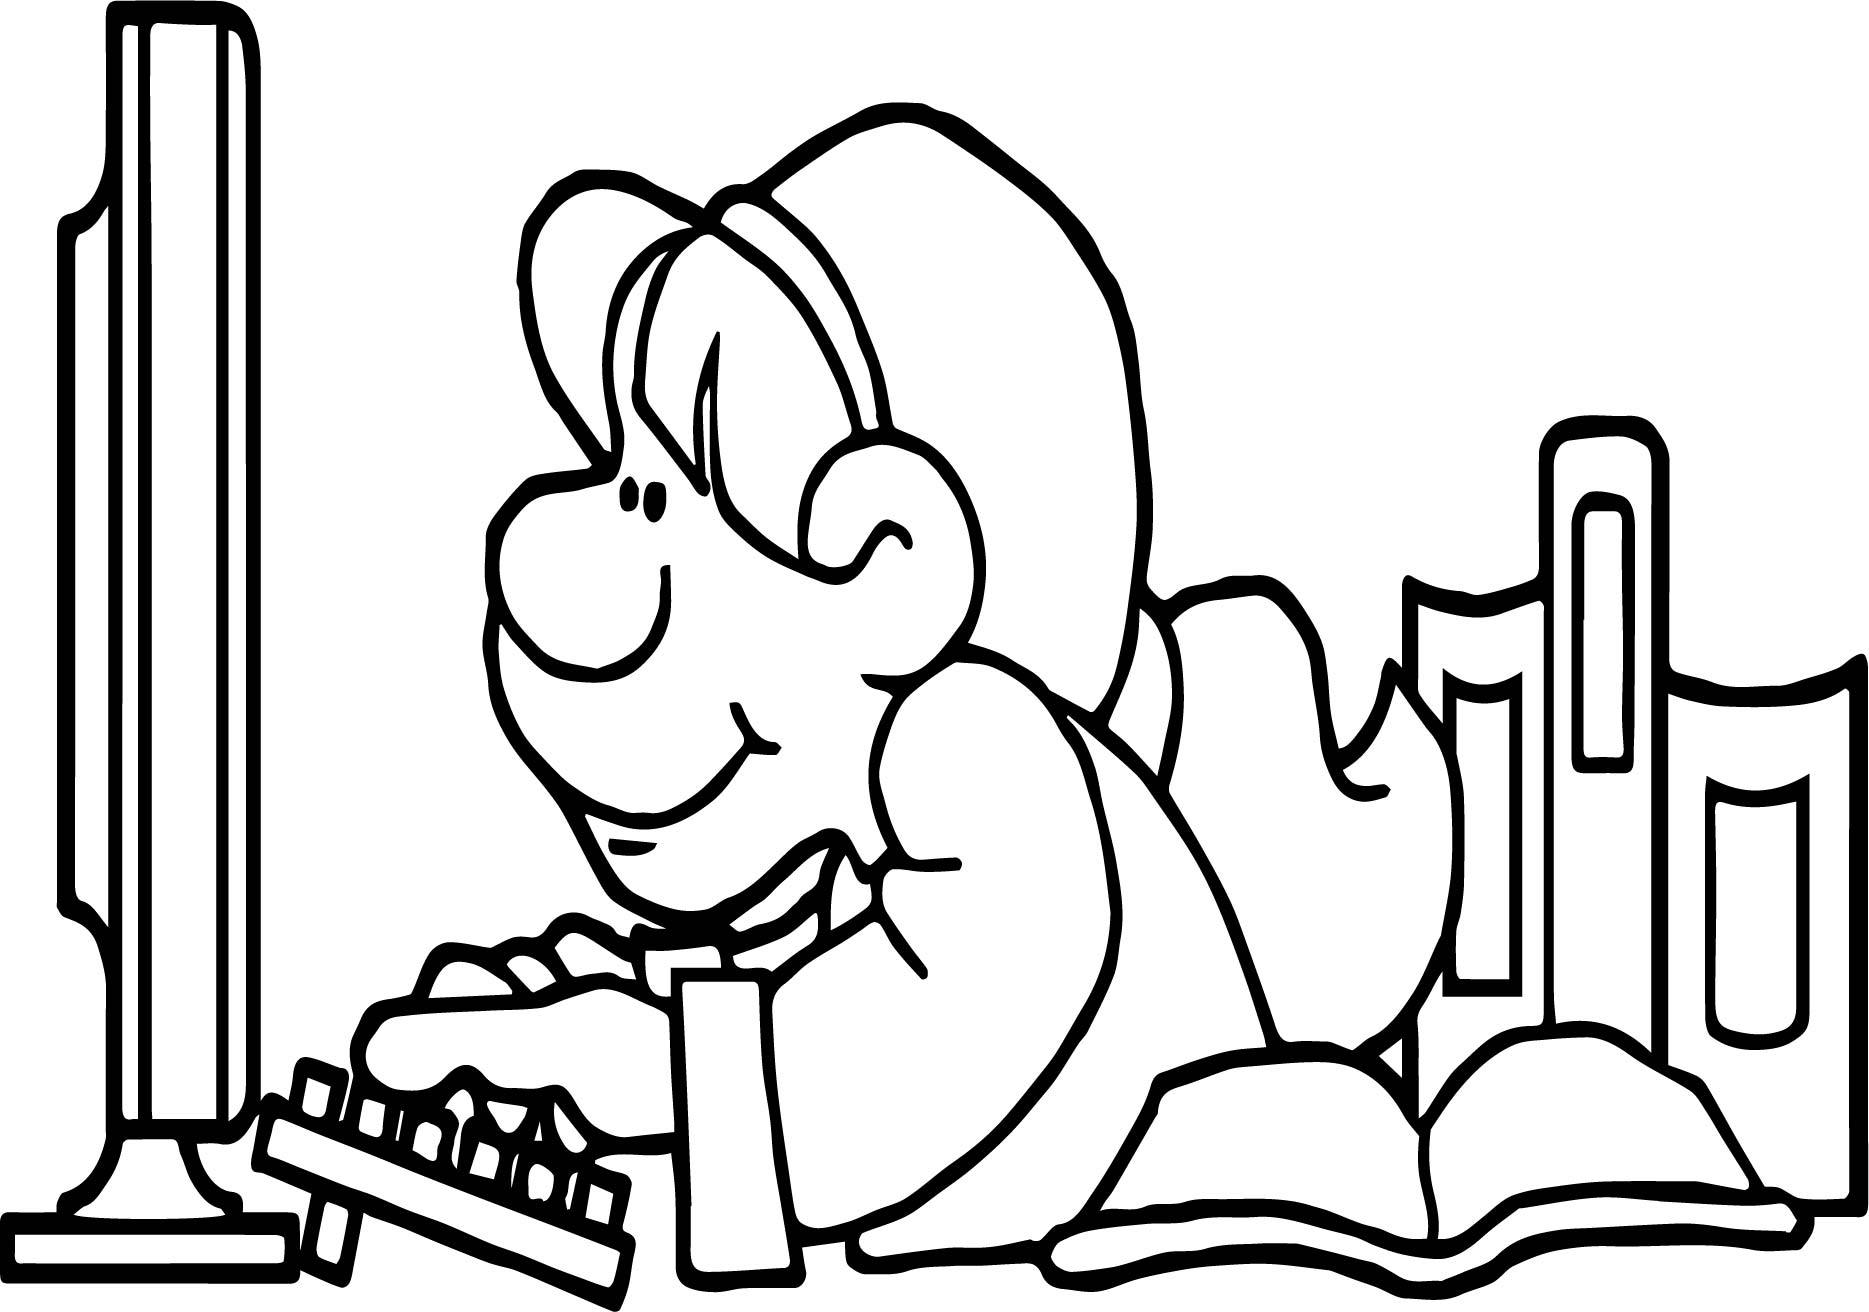 Coloring Pages Computer Games : 60 Computer Coloring Page 07 Coloring